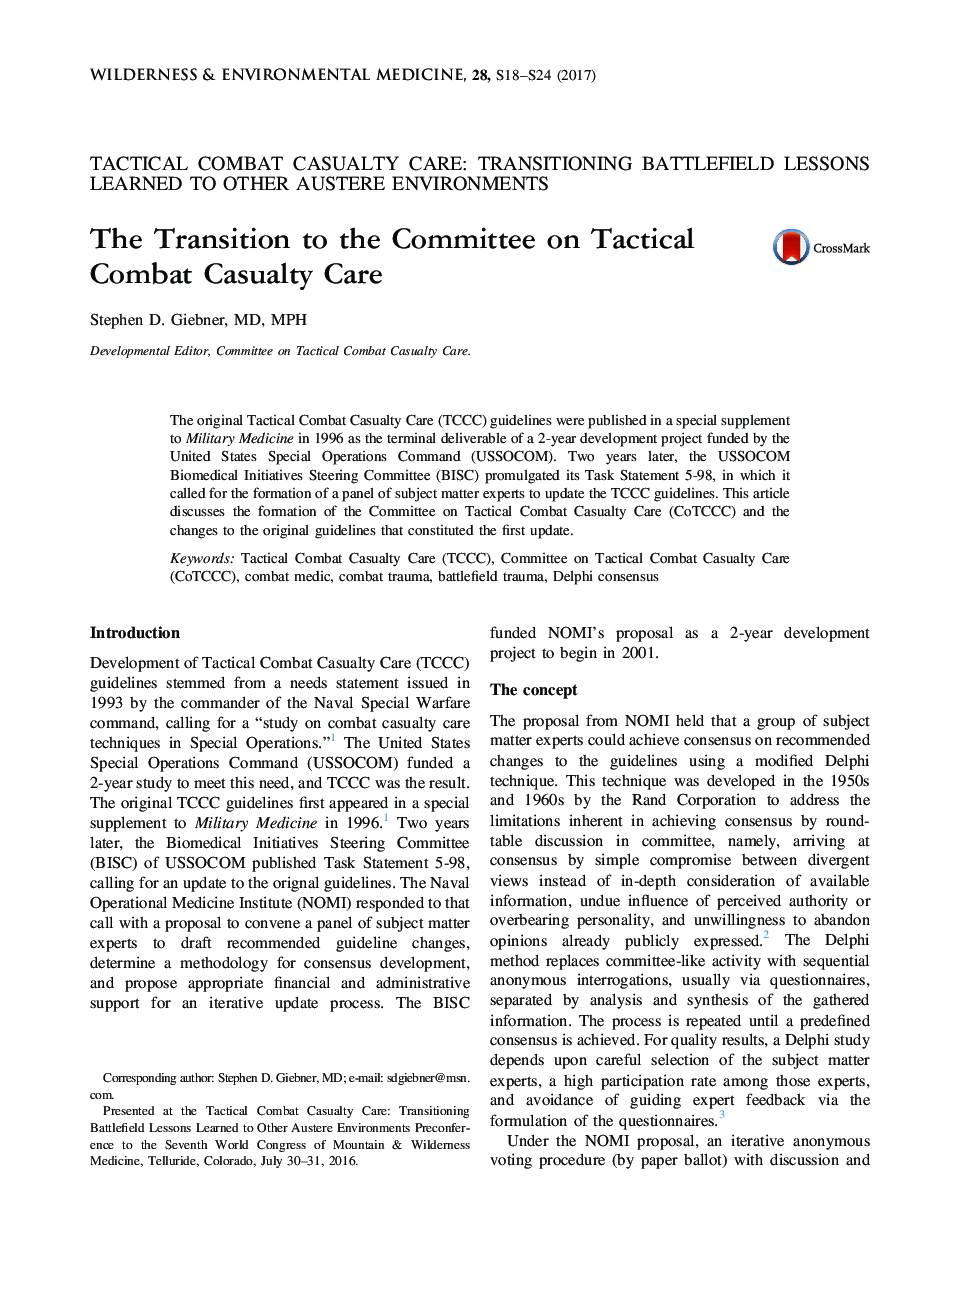 The Transition to the Committee on Tactical Combat Casualty Care